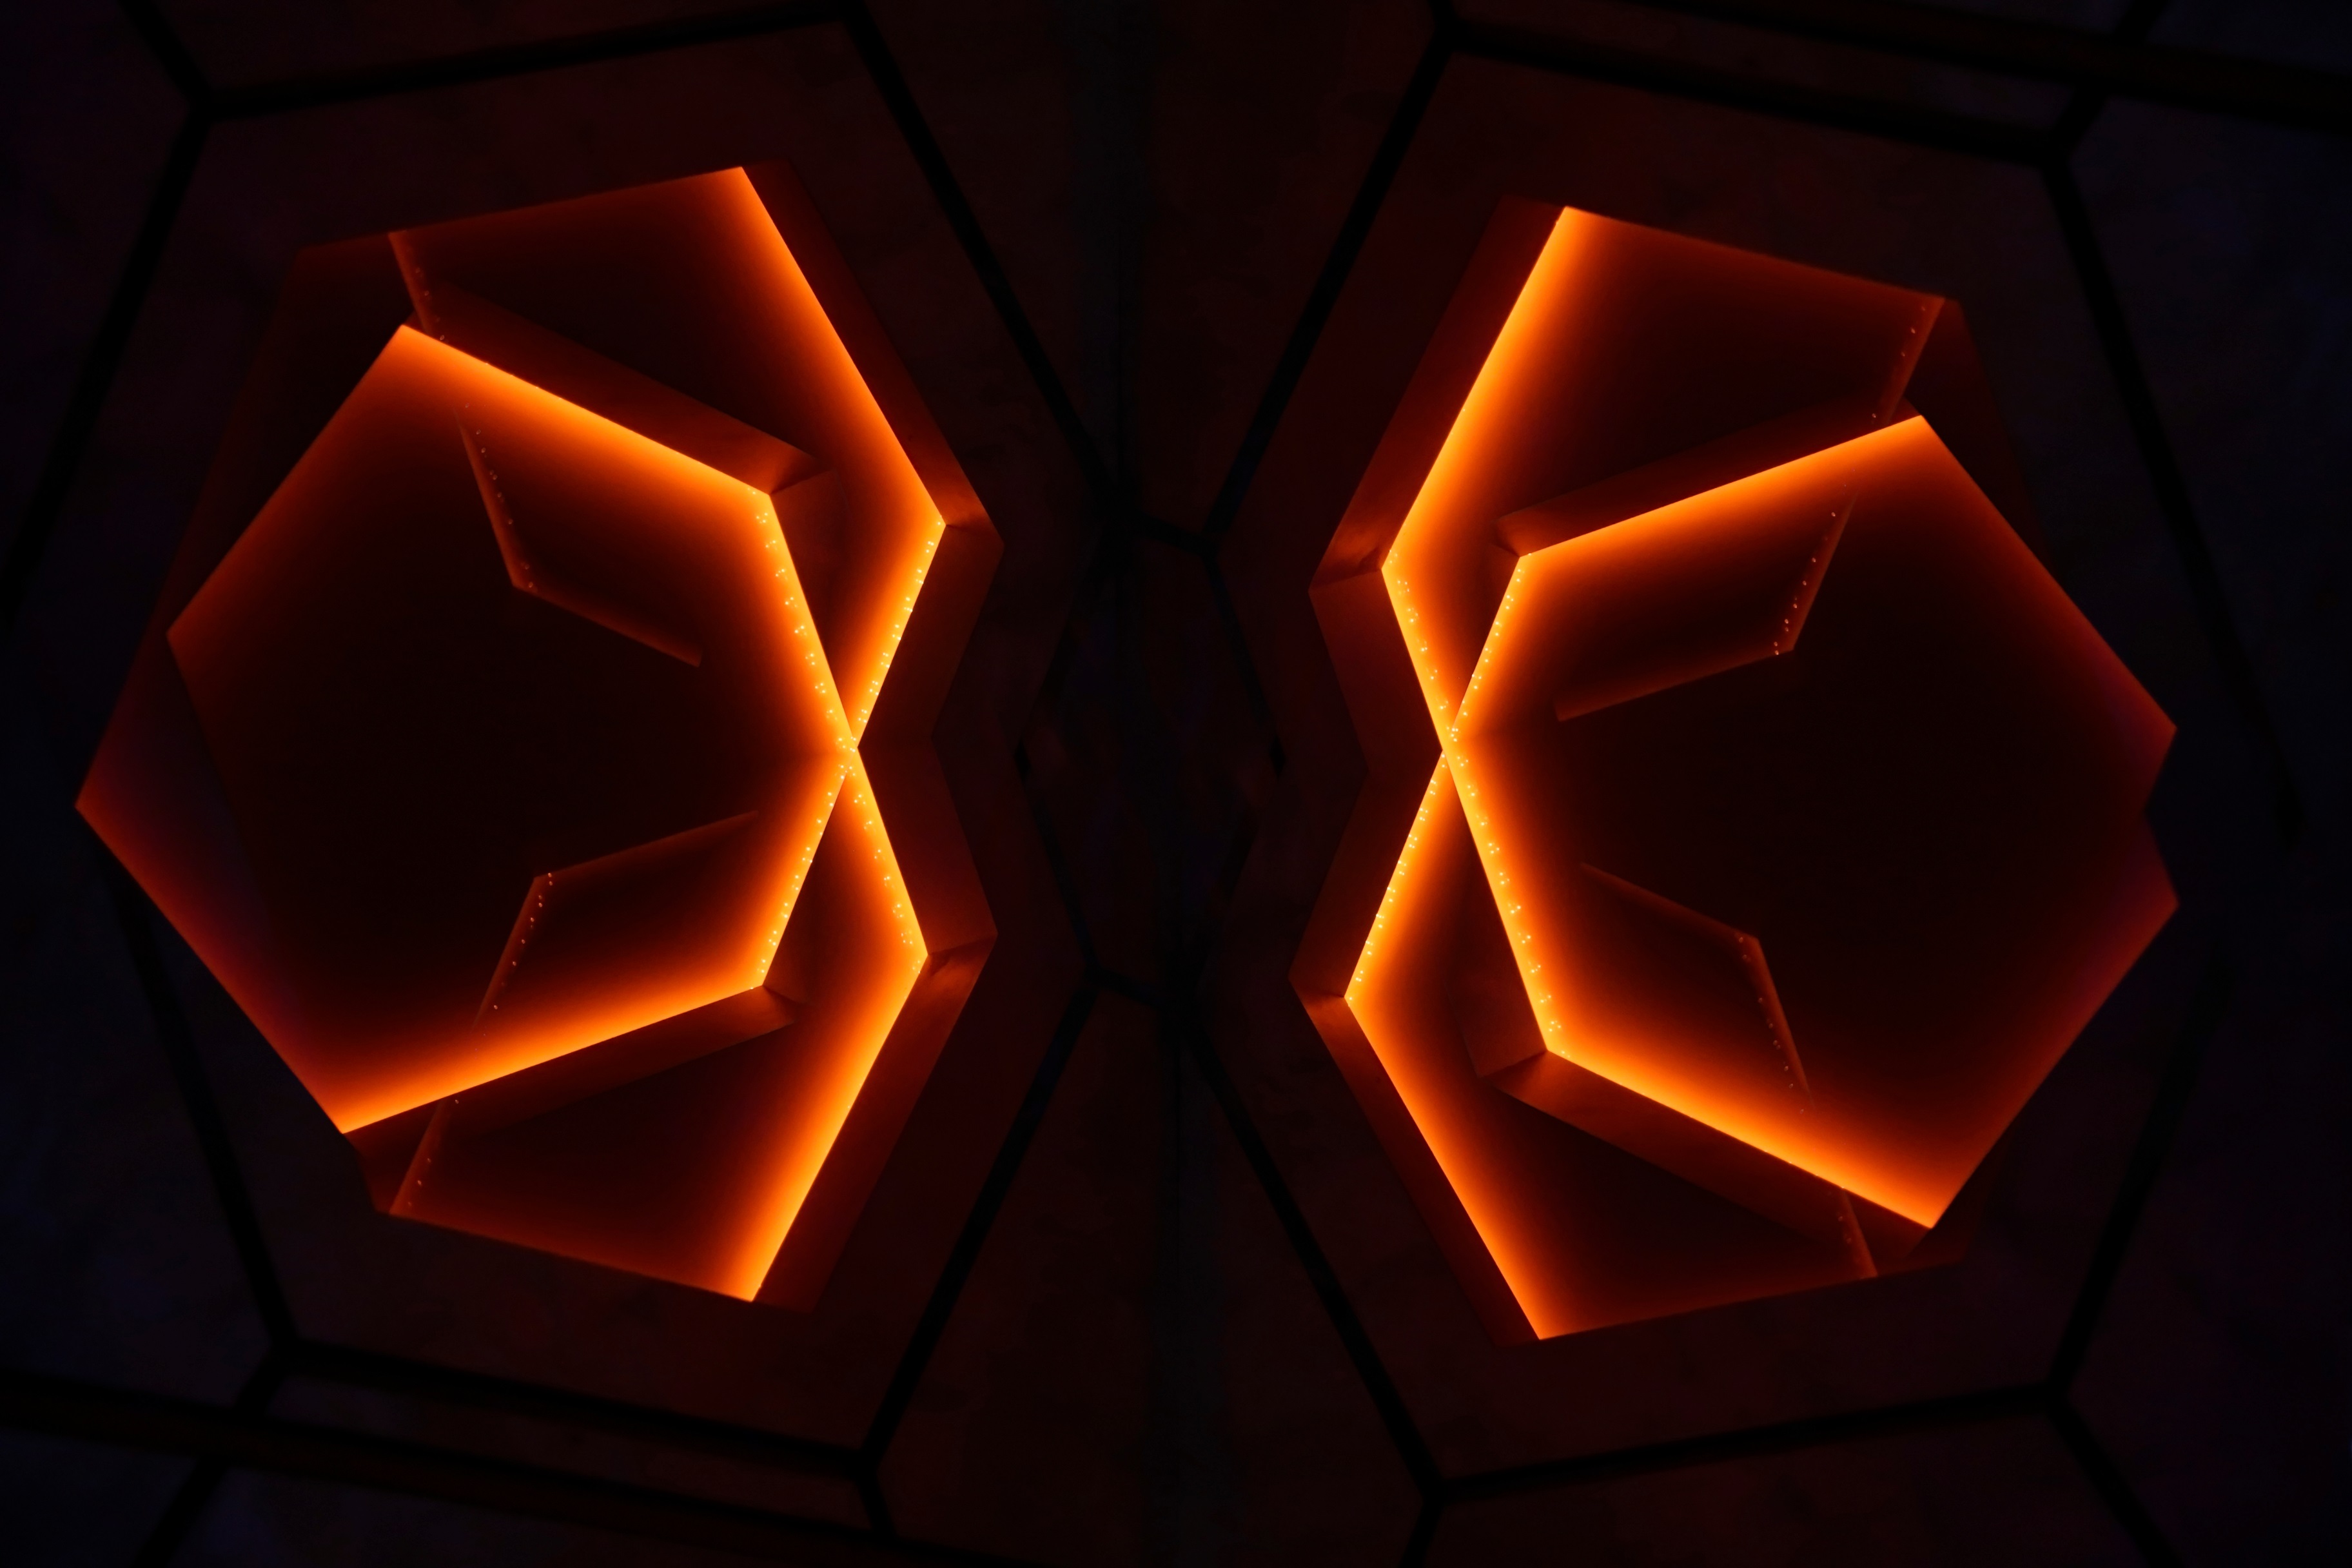 Abstract 3D Abstract Neon Lights Digital Geometry Shapes Minimalism Dark Glowing 3648x2432